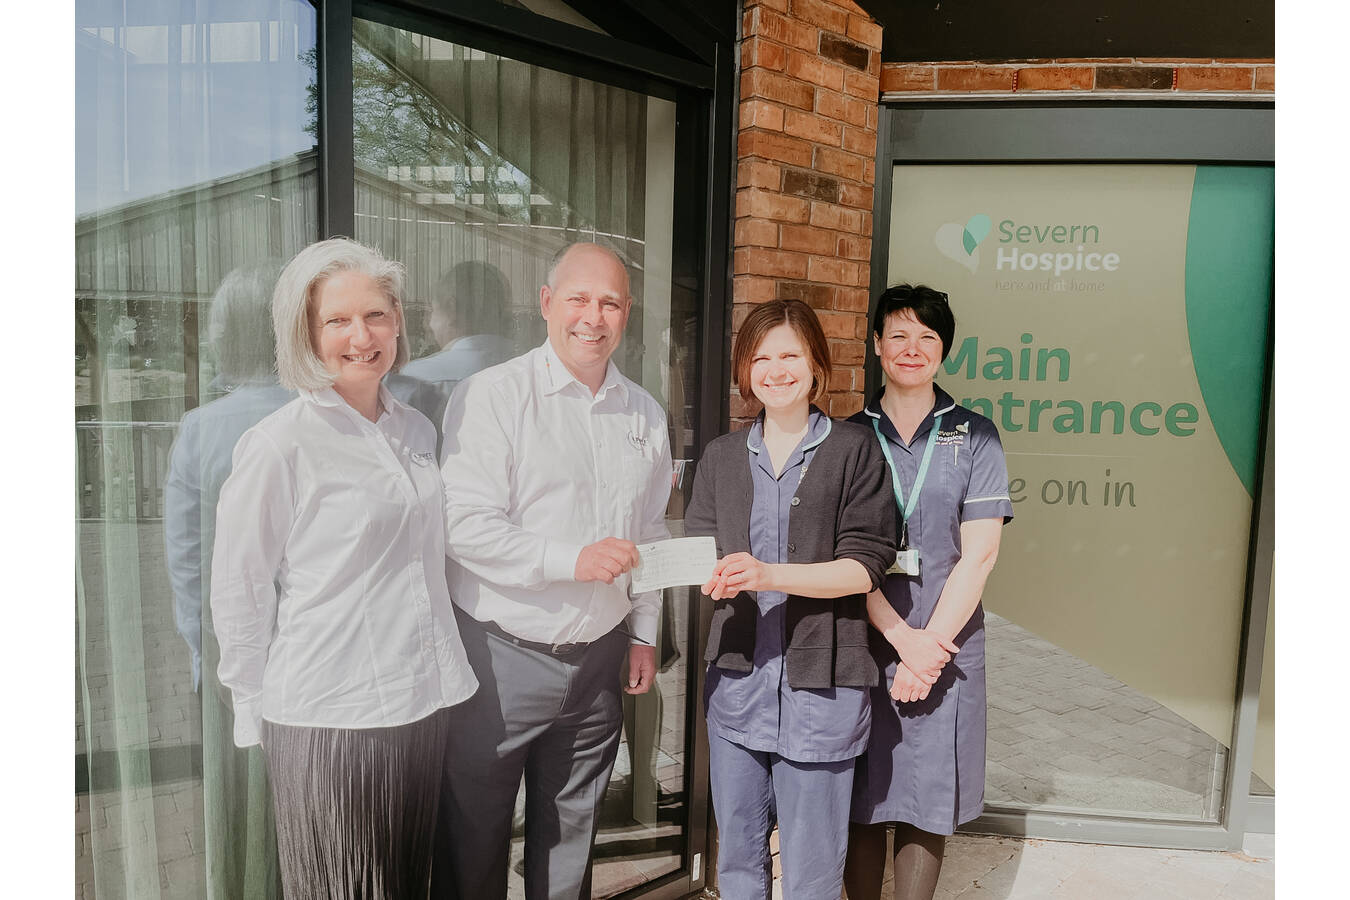 A matter of heart - Severn Hospice As part of our UWT cares commitment, our colleagues at the UWT UK subsidiary in Shrewsbury drew our attention to the Severn Hospice, which provides free specialist care and support to families living with an incurable illness.